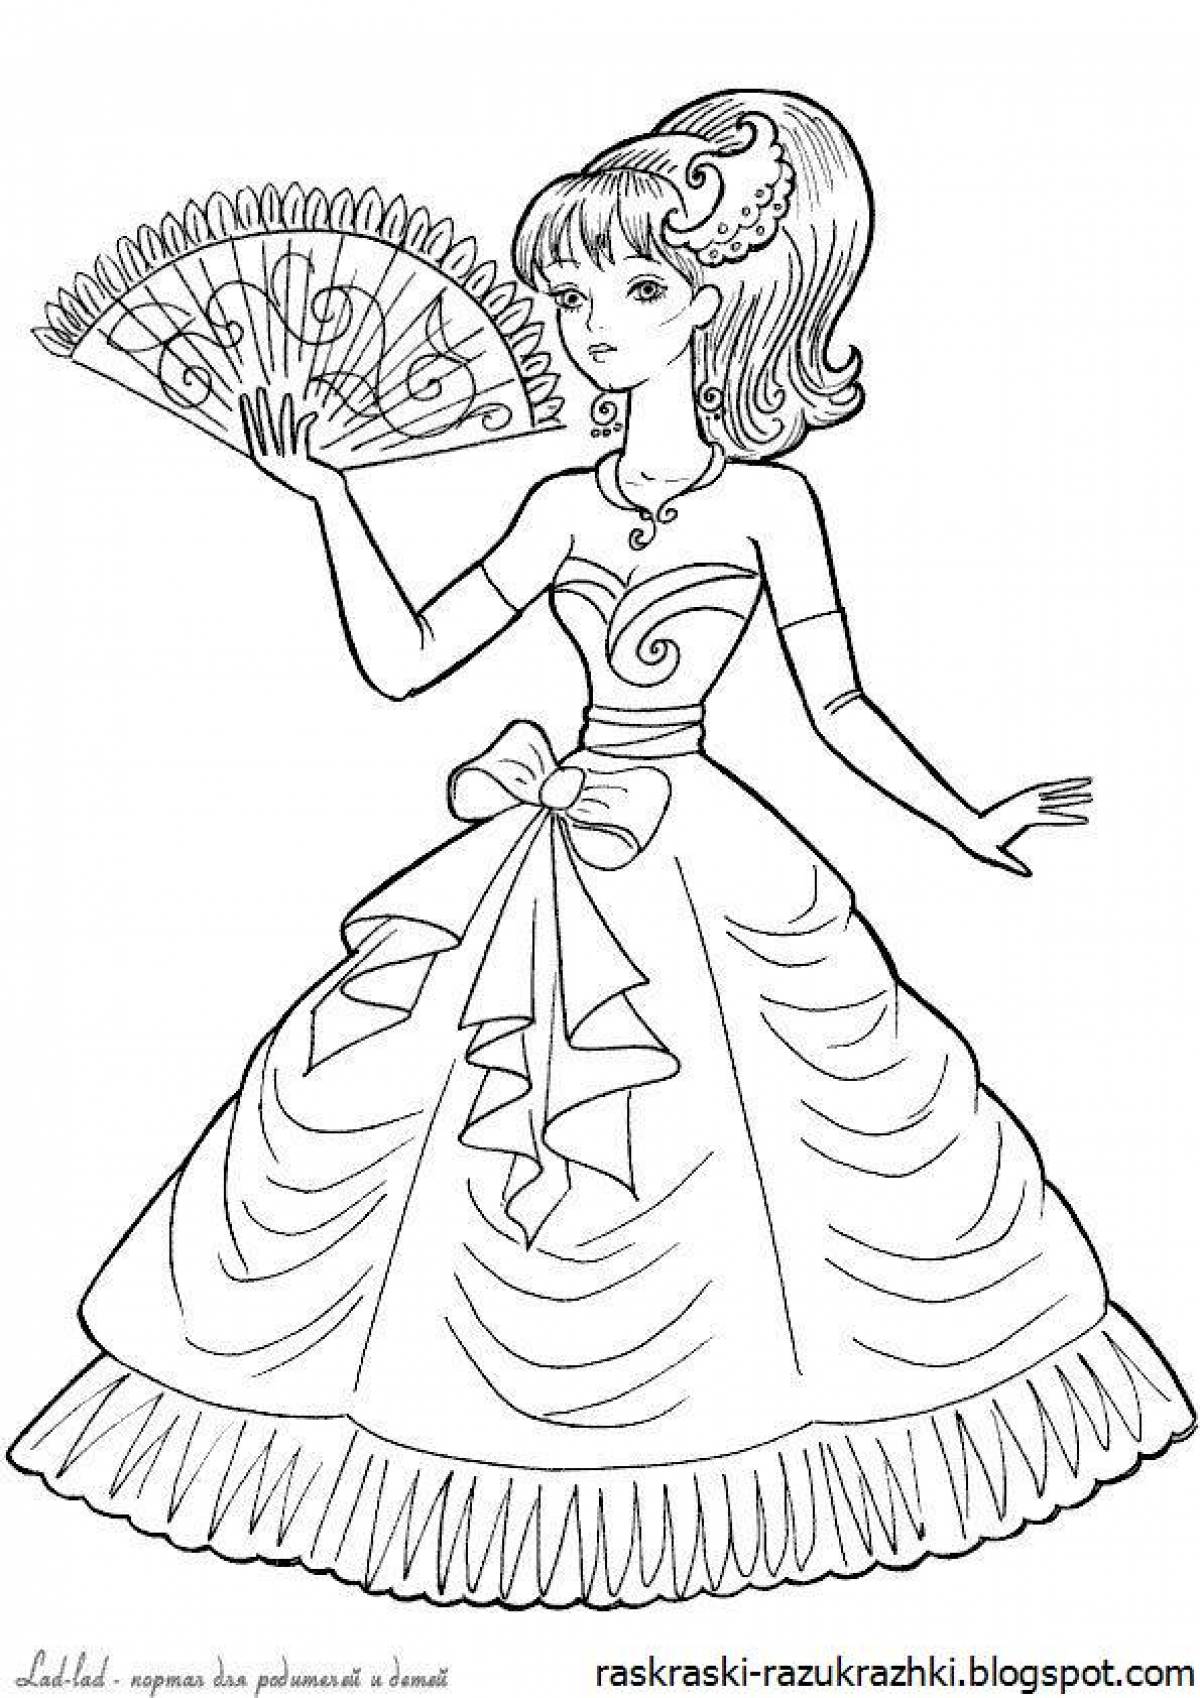 Glitter coloring pages of princesses in beautiful dresses